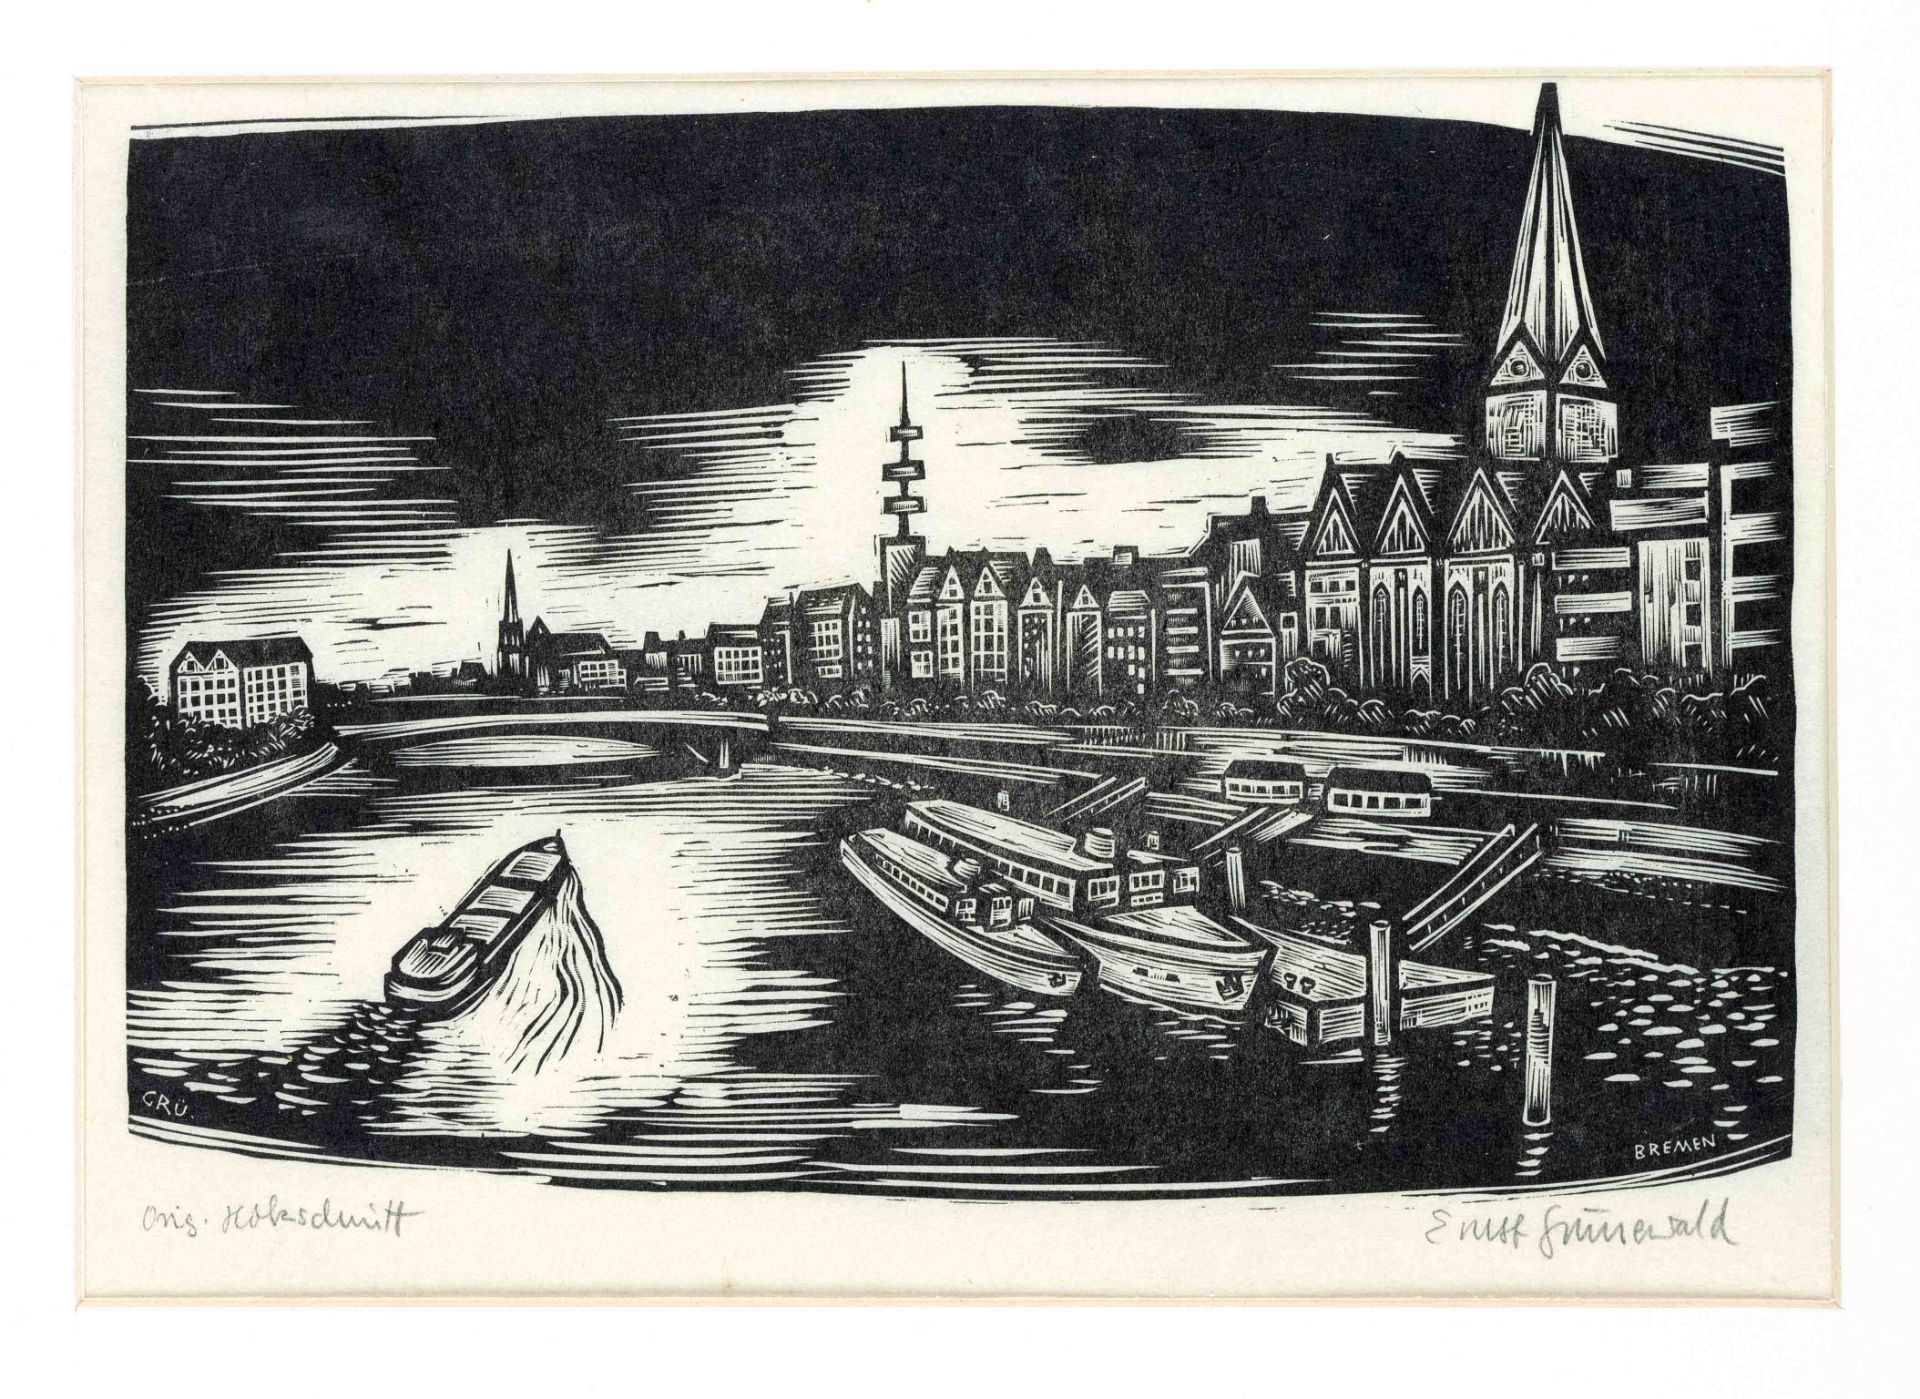 Ernst Grünewald (1907-1986), printmaker from Bremen, studied at the Leipzig Academy of Applied Arts,